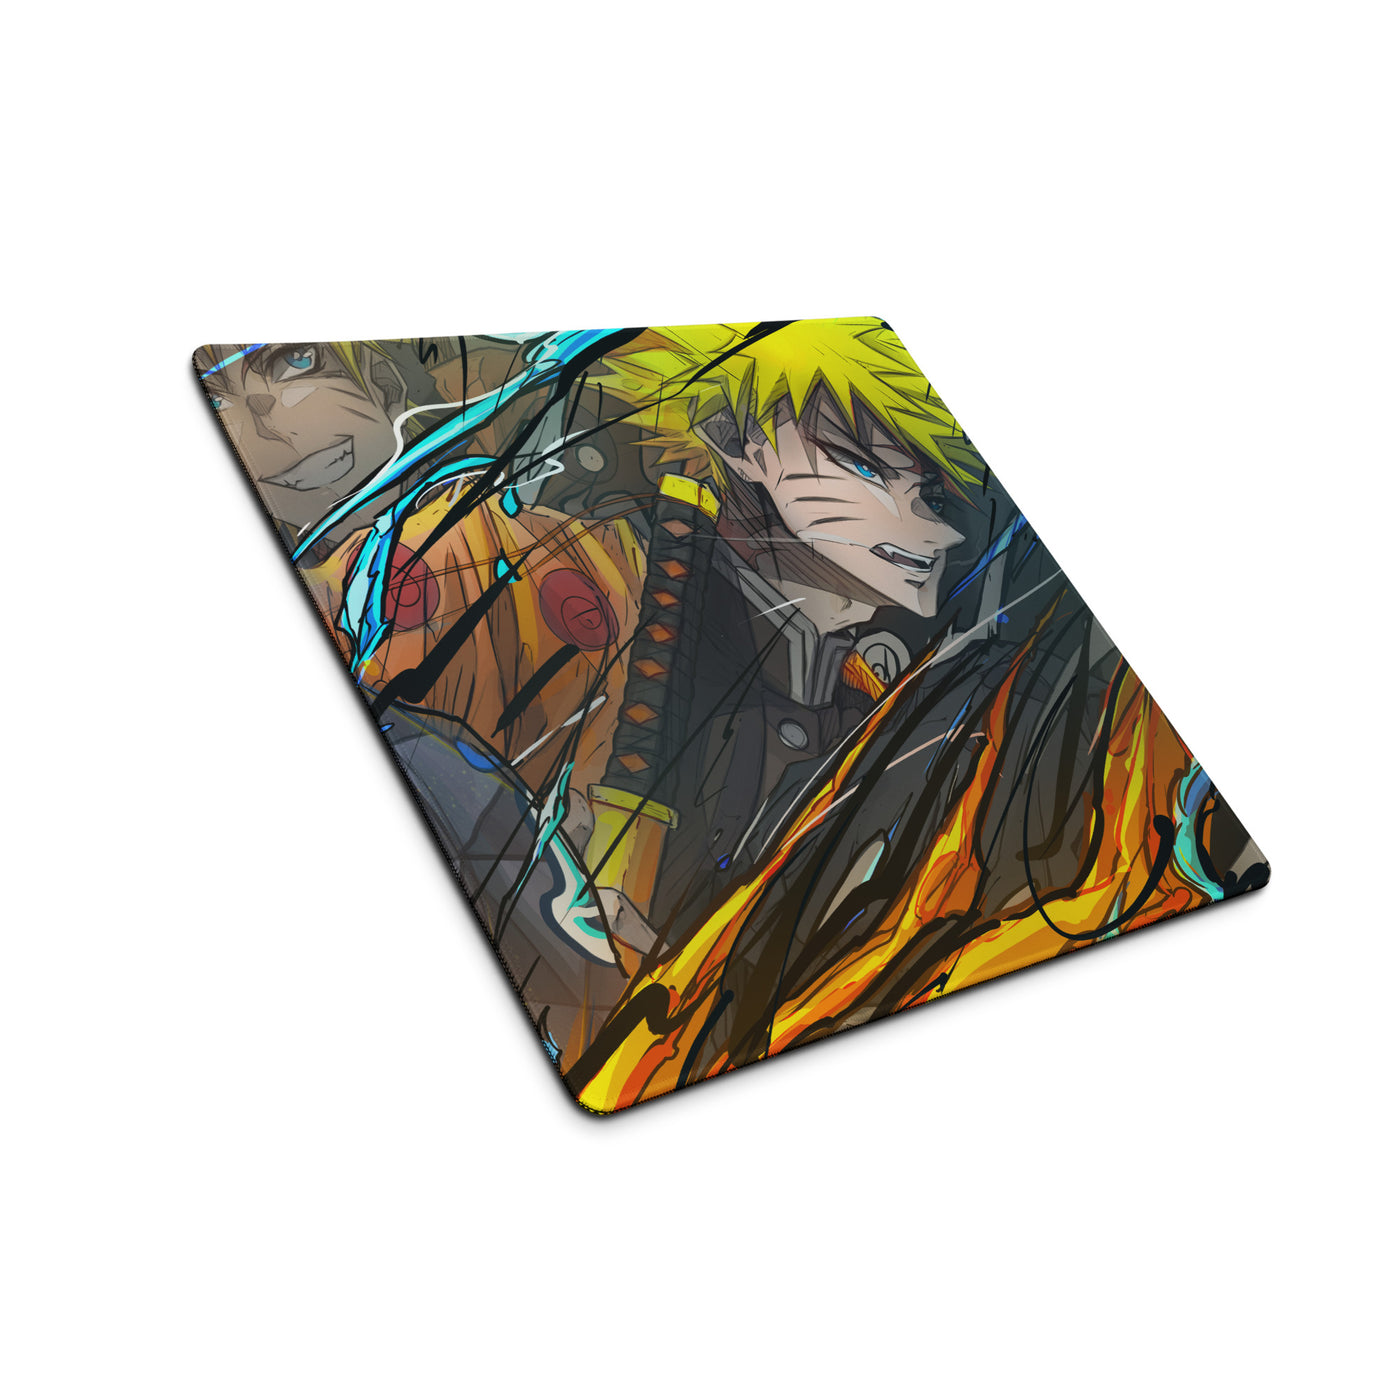 Naruto in Demon Slayer Gaming mouse pad